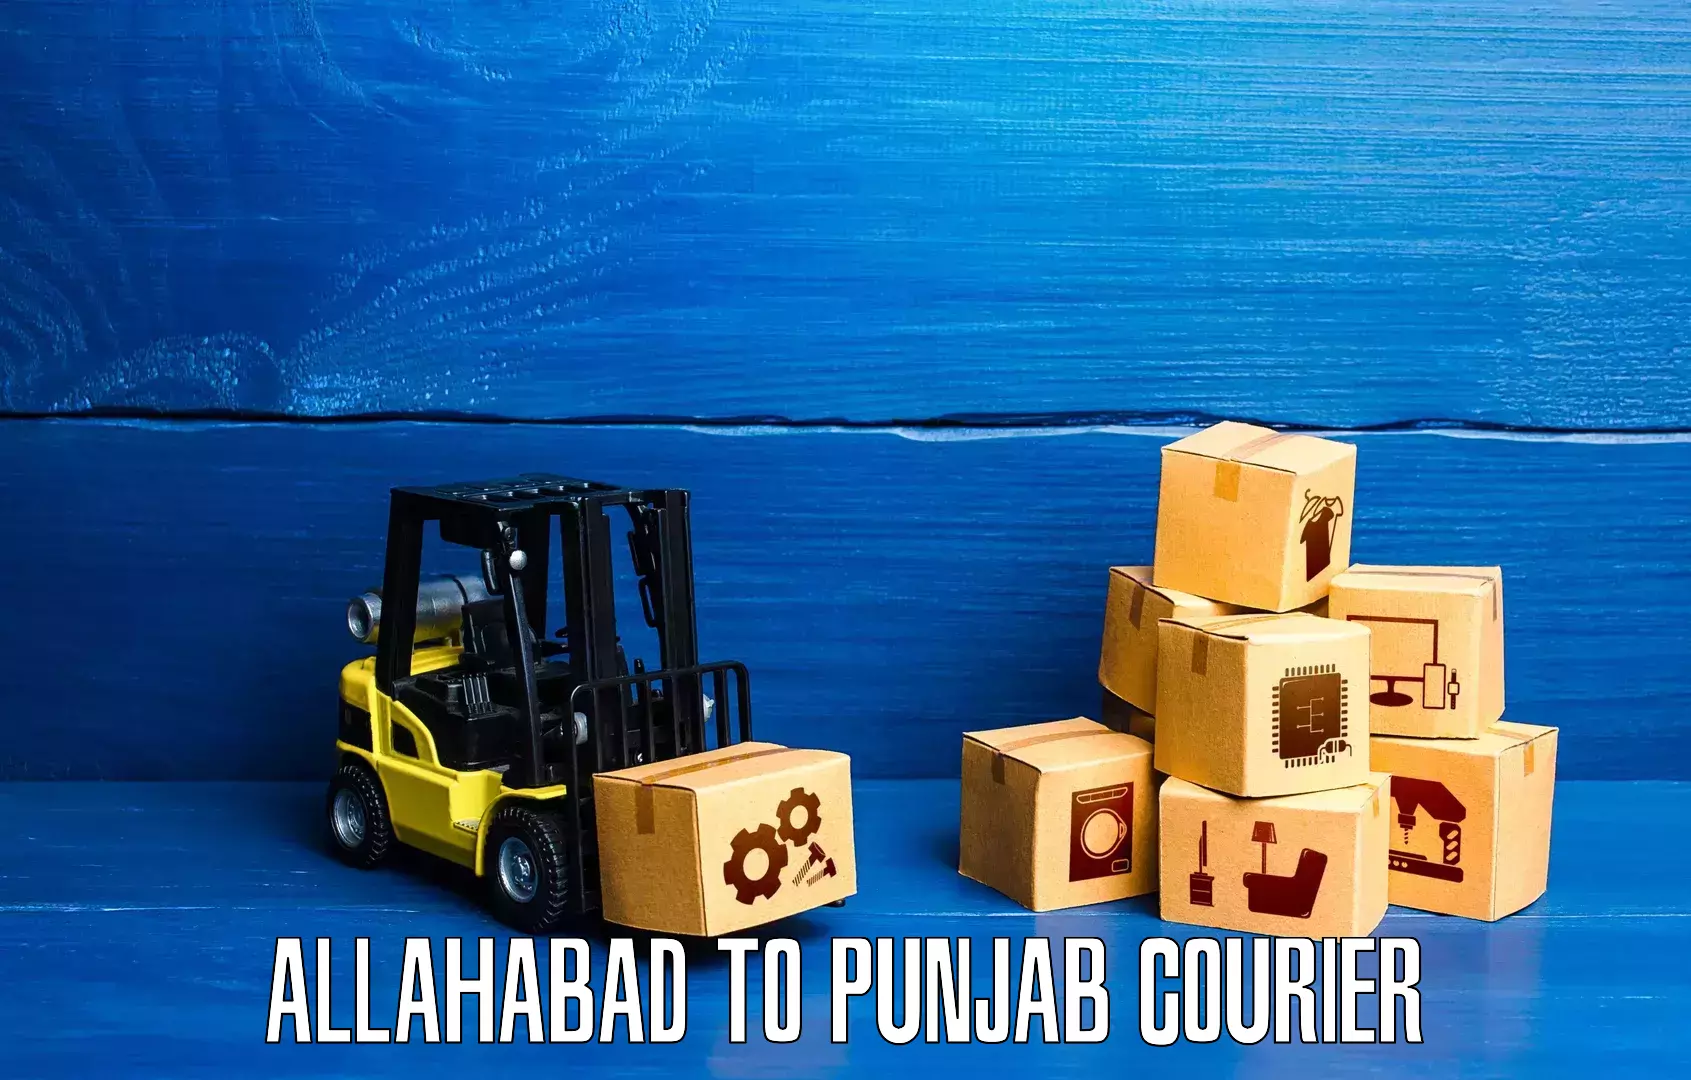 Courier service efficiency Allahabad to Jalandhar